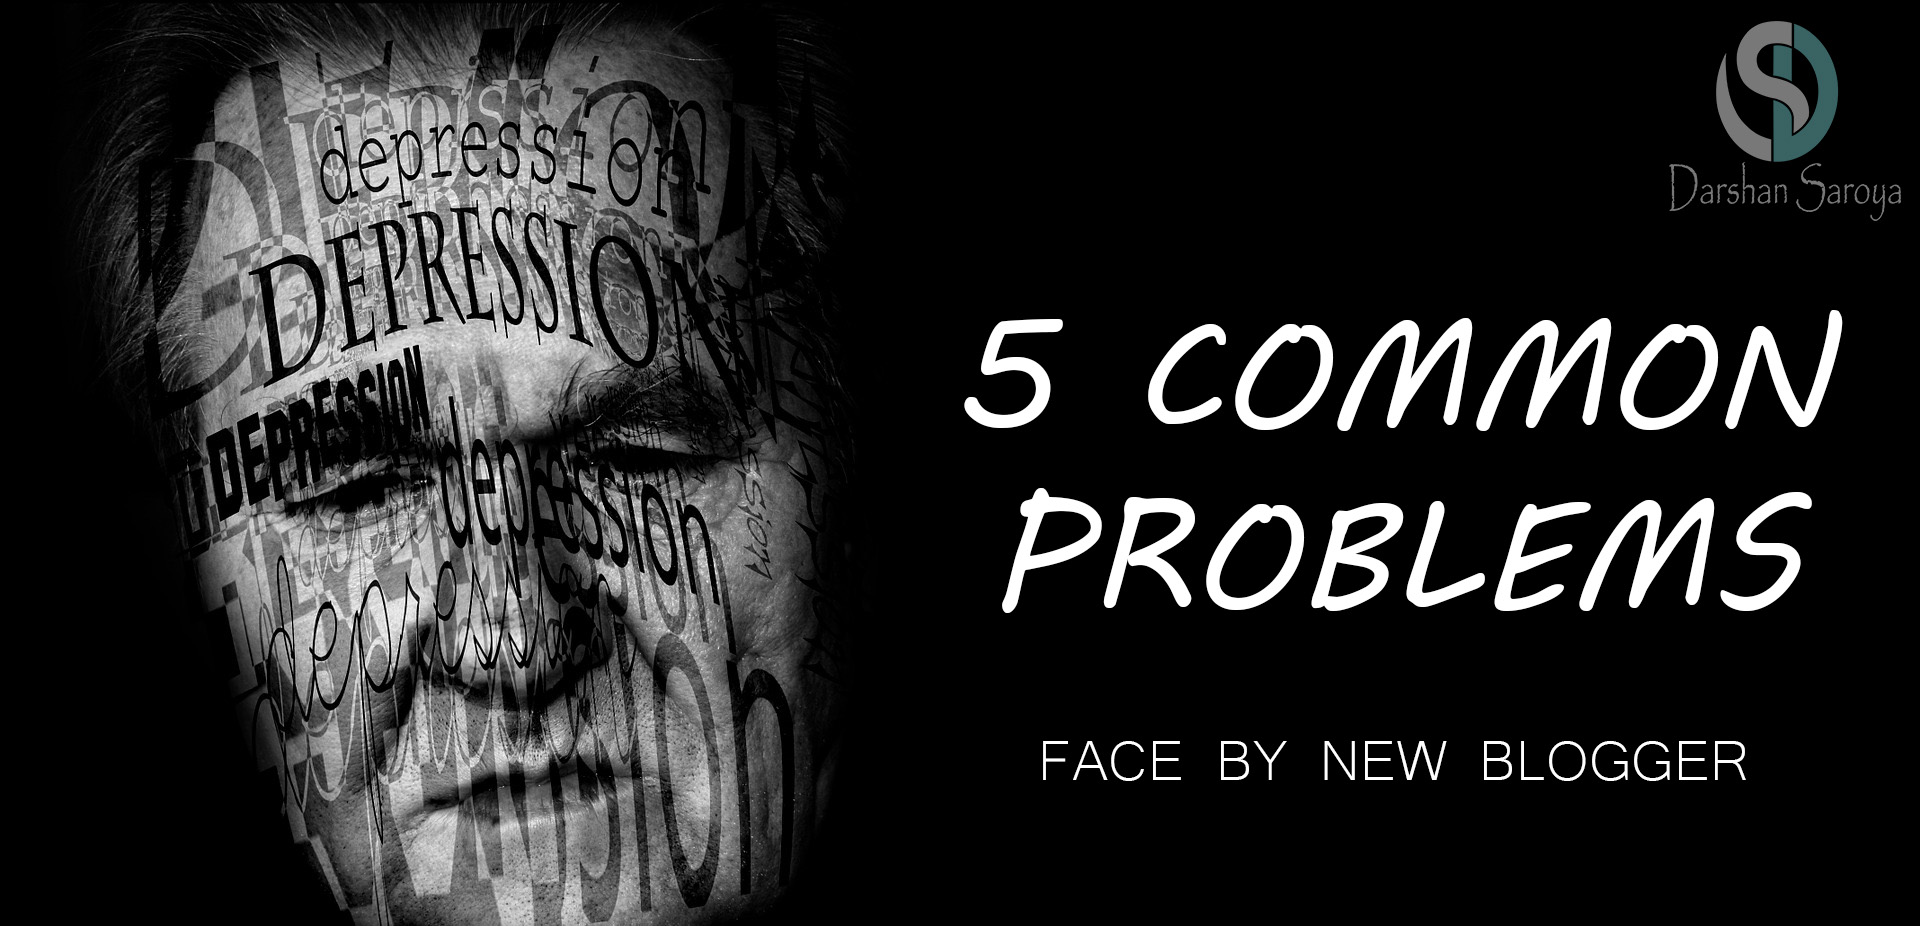 5 COMMON PROBLEMS FACE BY NEW BLOGGER